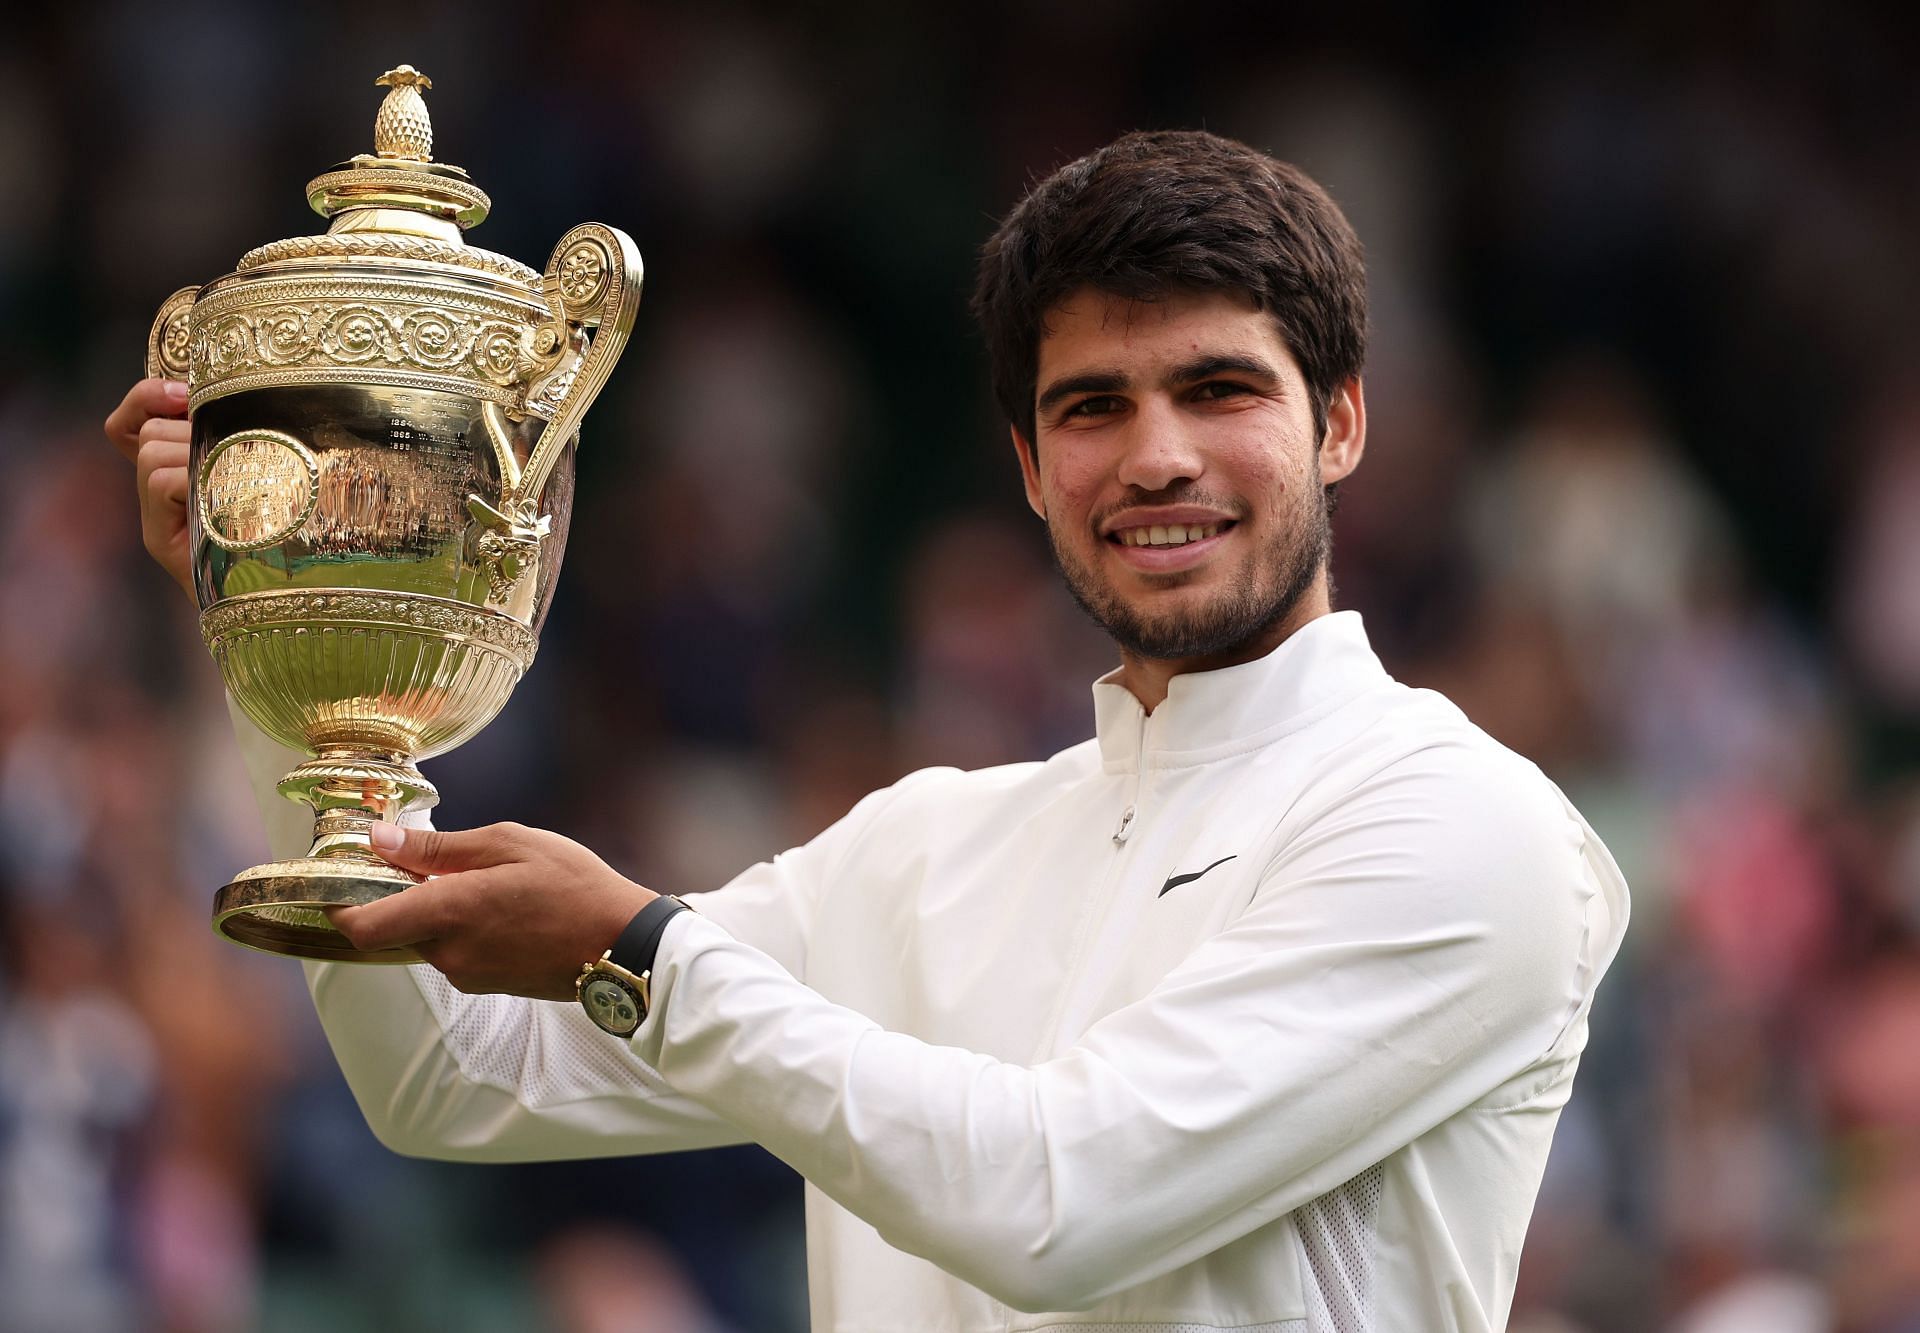 Alcaraz pictured at the 2023 Wimbledon Championships (Image Source: Getty)